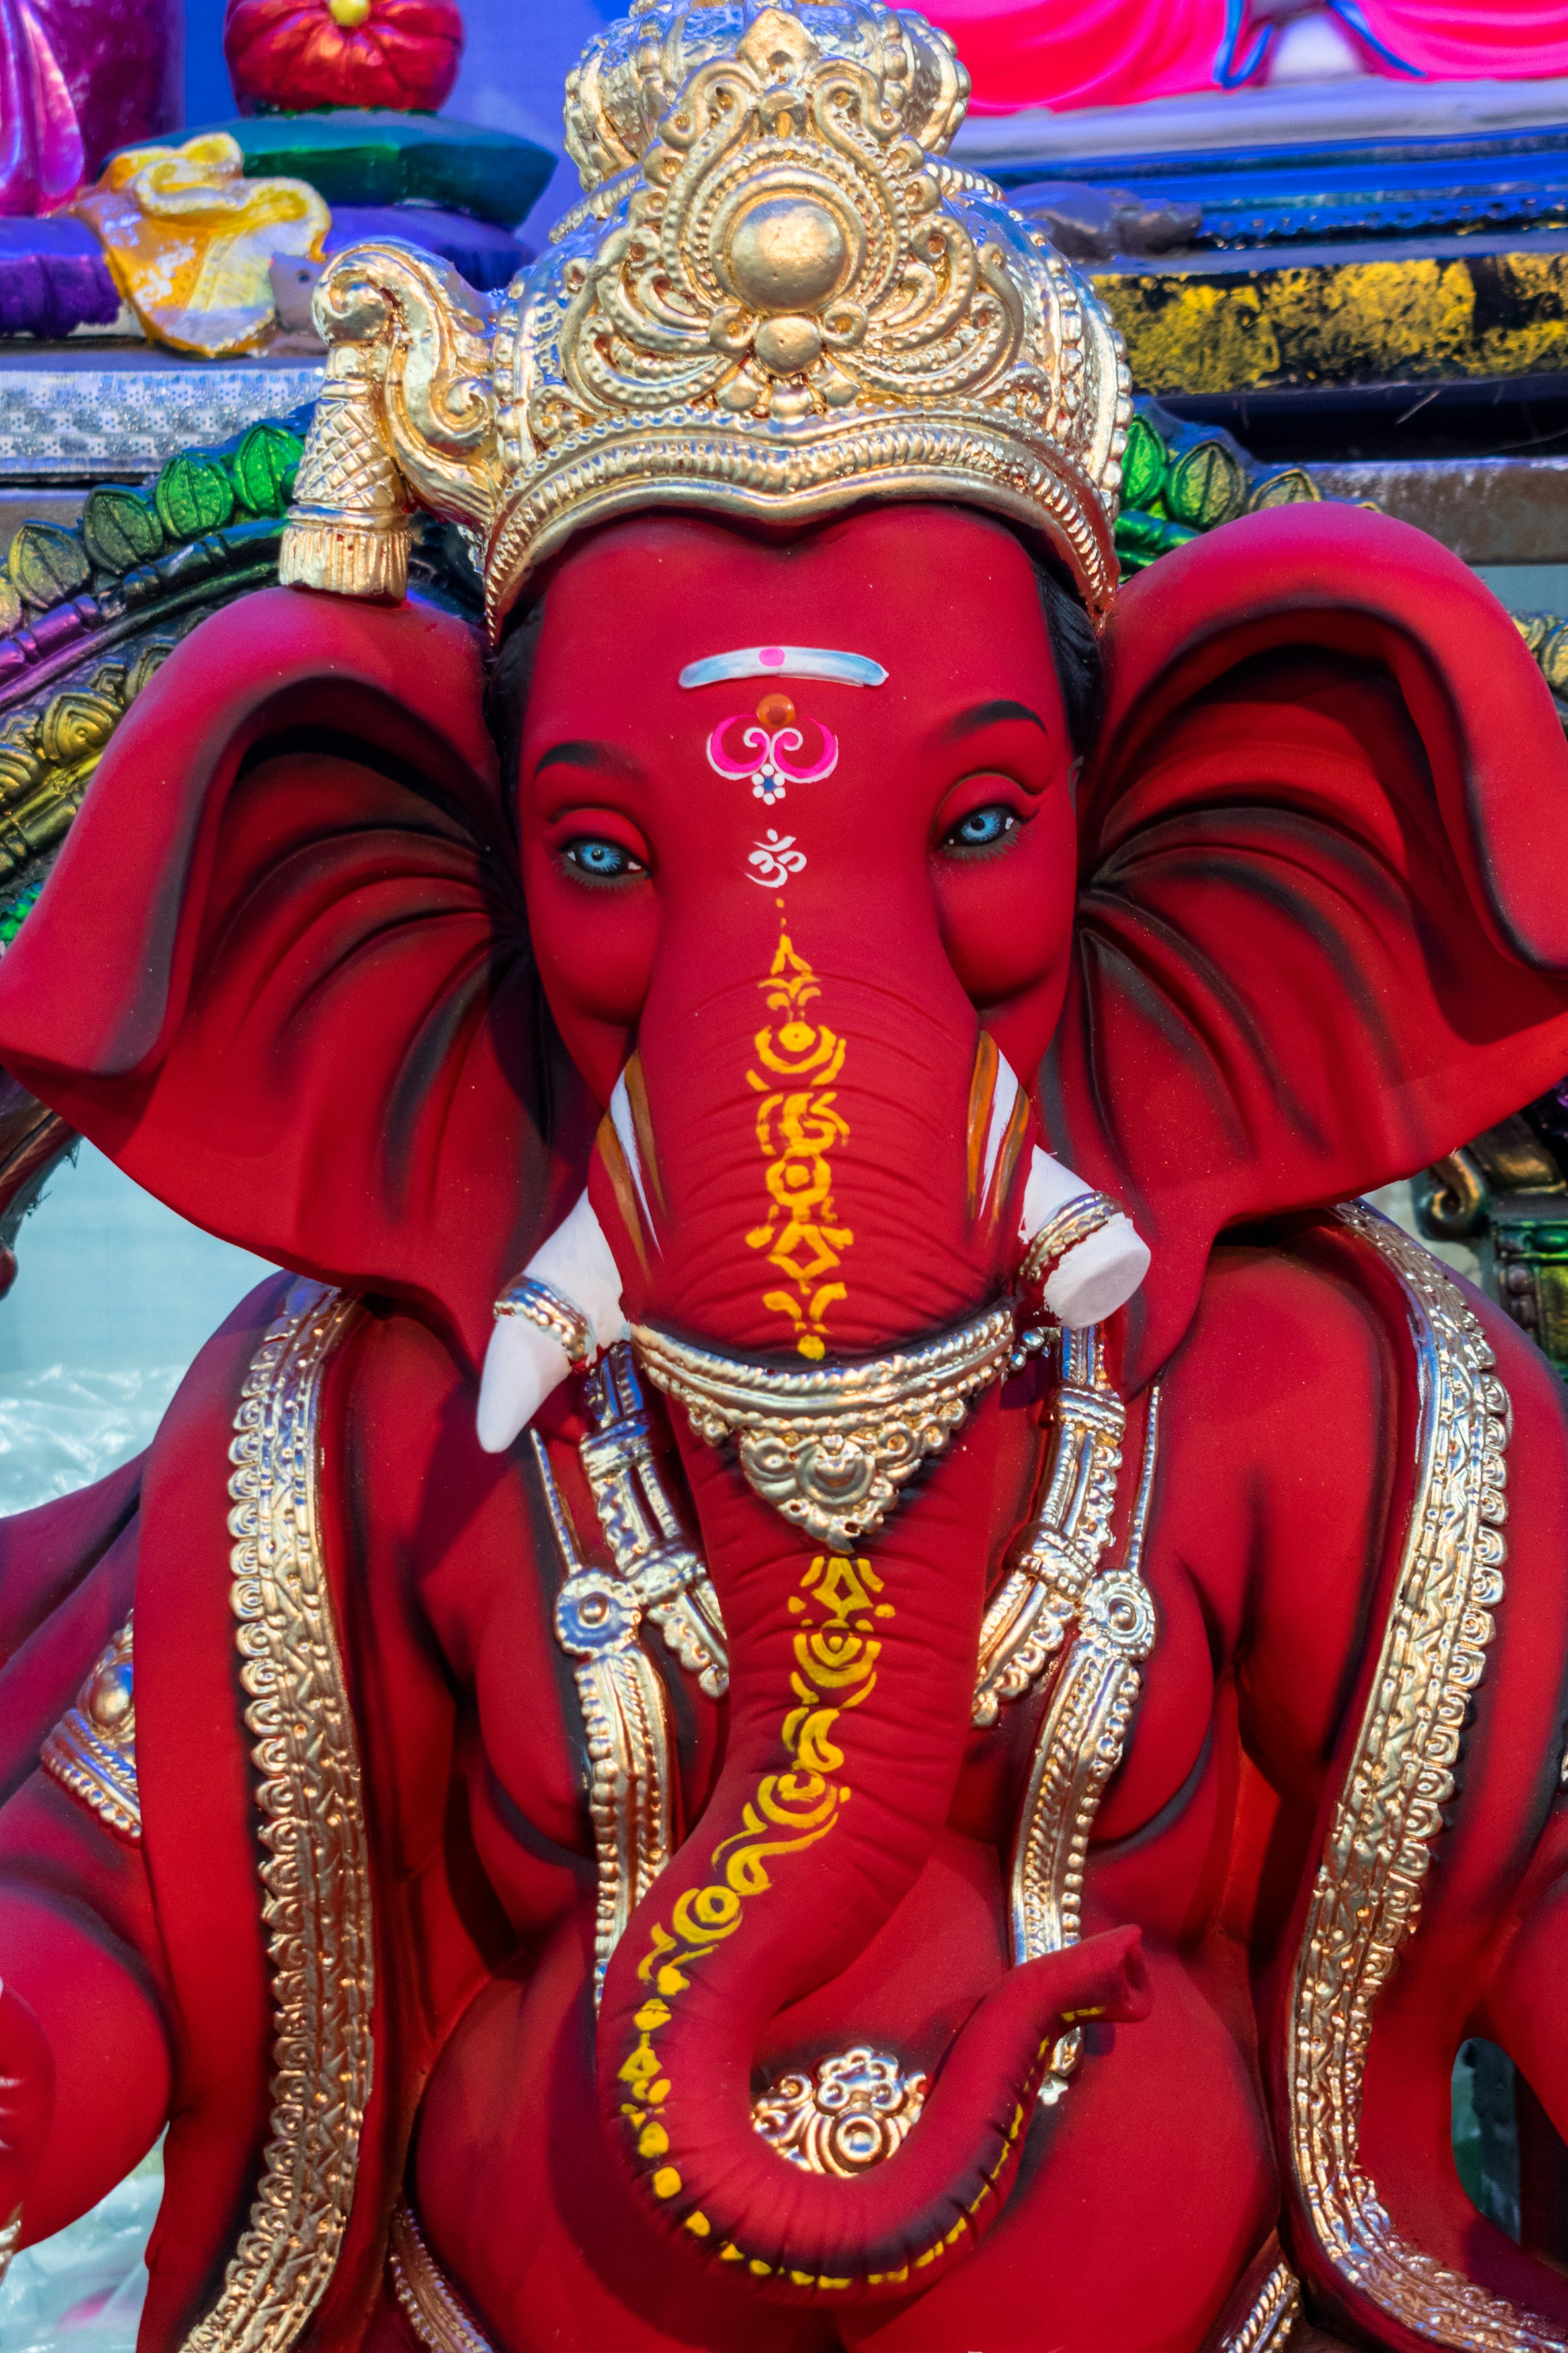 A beautiful idol of Lord Ganpati on display at a workshop in Mumbai, India for the festival of Ganesh Chaturthi